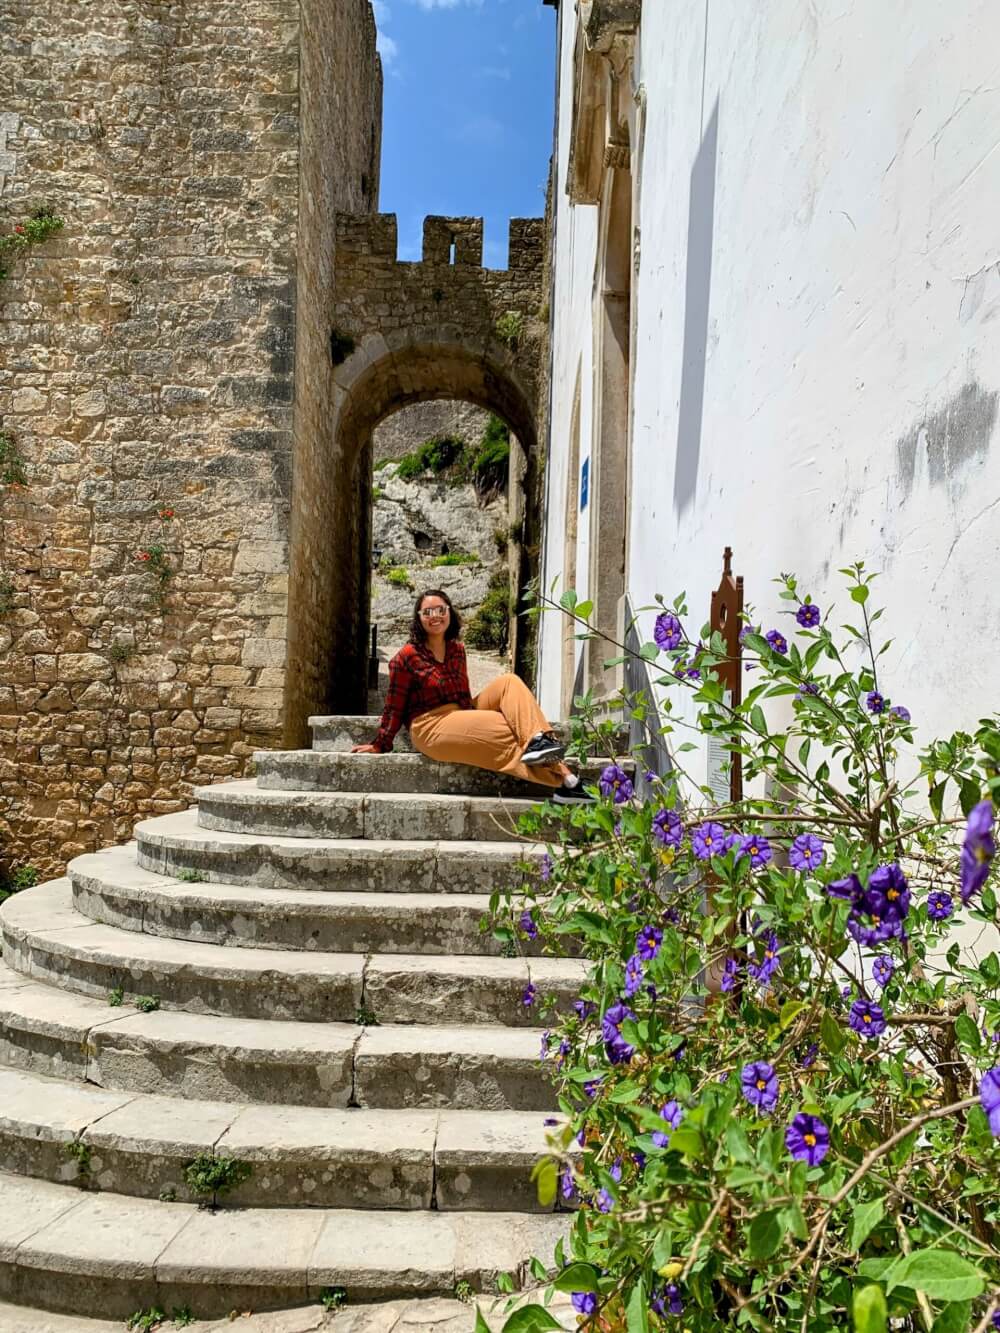 A person sitting on a step in front of a castle entrance